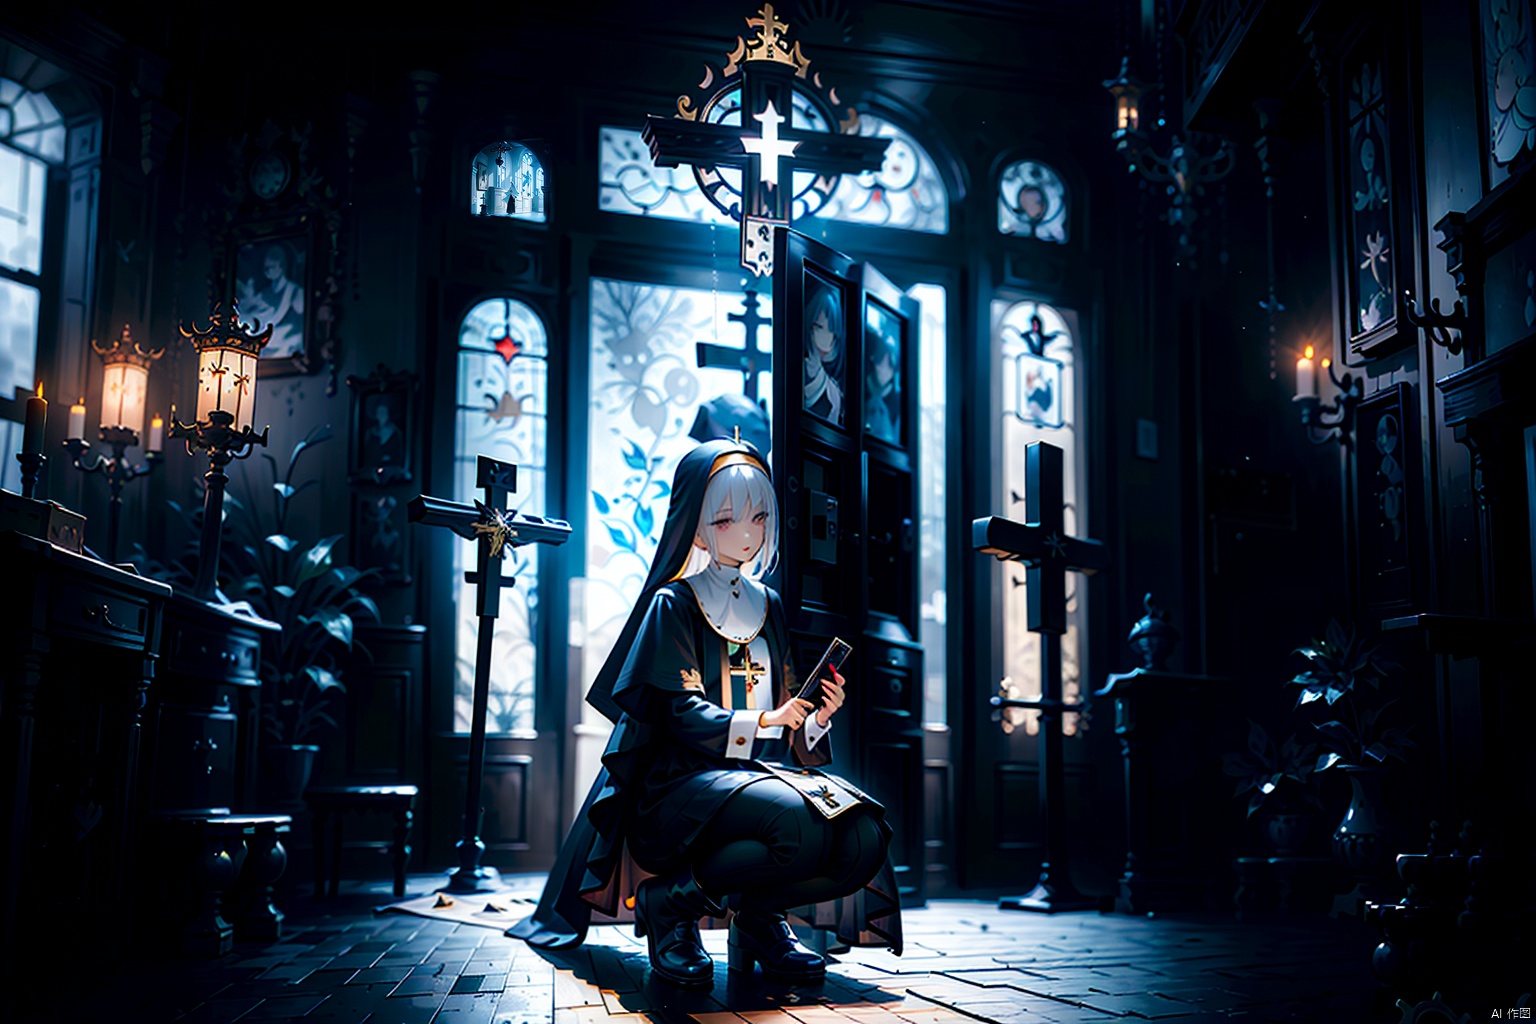  masterpiece,best quality,UHD,impossible clothes,****_female, white hair,nun,church bell,pew,church,dark aura,dark room,black sclera,statue,praying,serious,expressionless,expressionless,slit pupils,devil pupils,black gloves,boots,one knee,f/2.8,stained glass,cryptid,no humans,fog,character signature,character watermark,gold gloves,black collar,cross choker,greek cross,crucifix,side mirror,background text, nai3, Glass flower room, midjourney, BY MOONCRYPTOWOW,HALO, Tight latex clothing, ghostdom